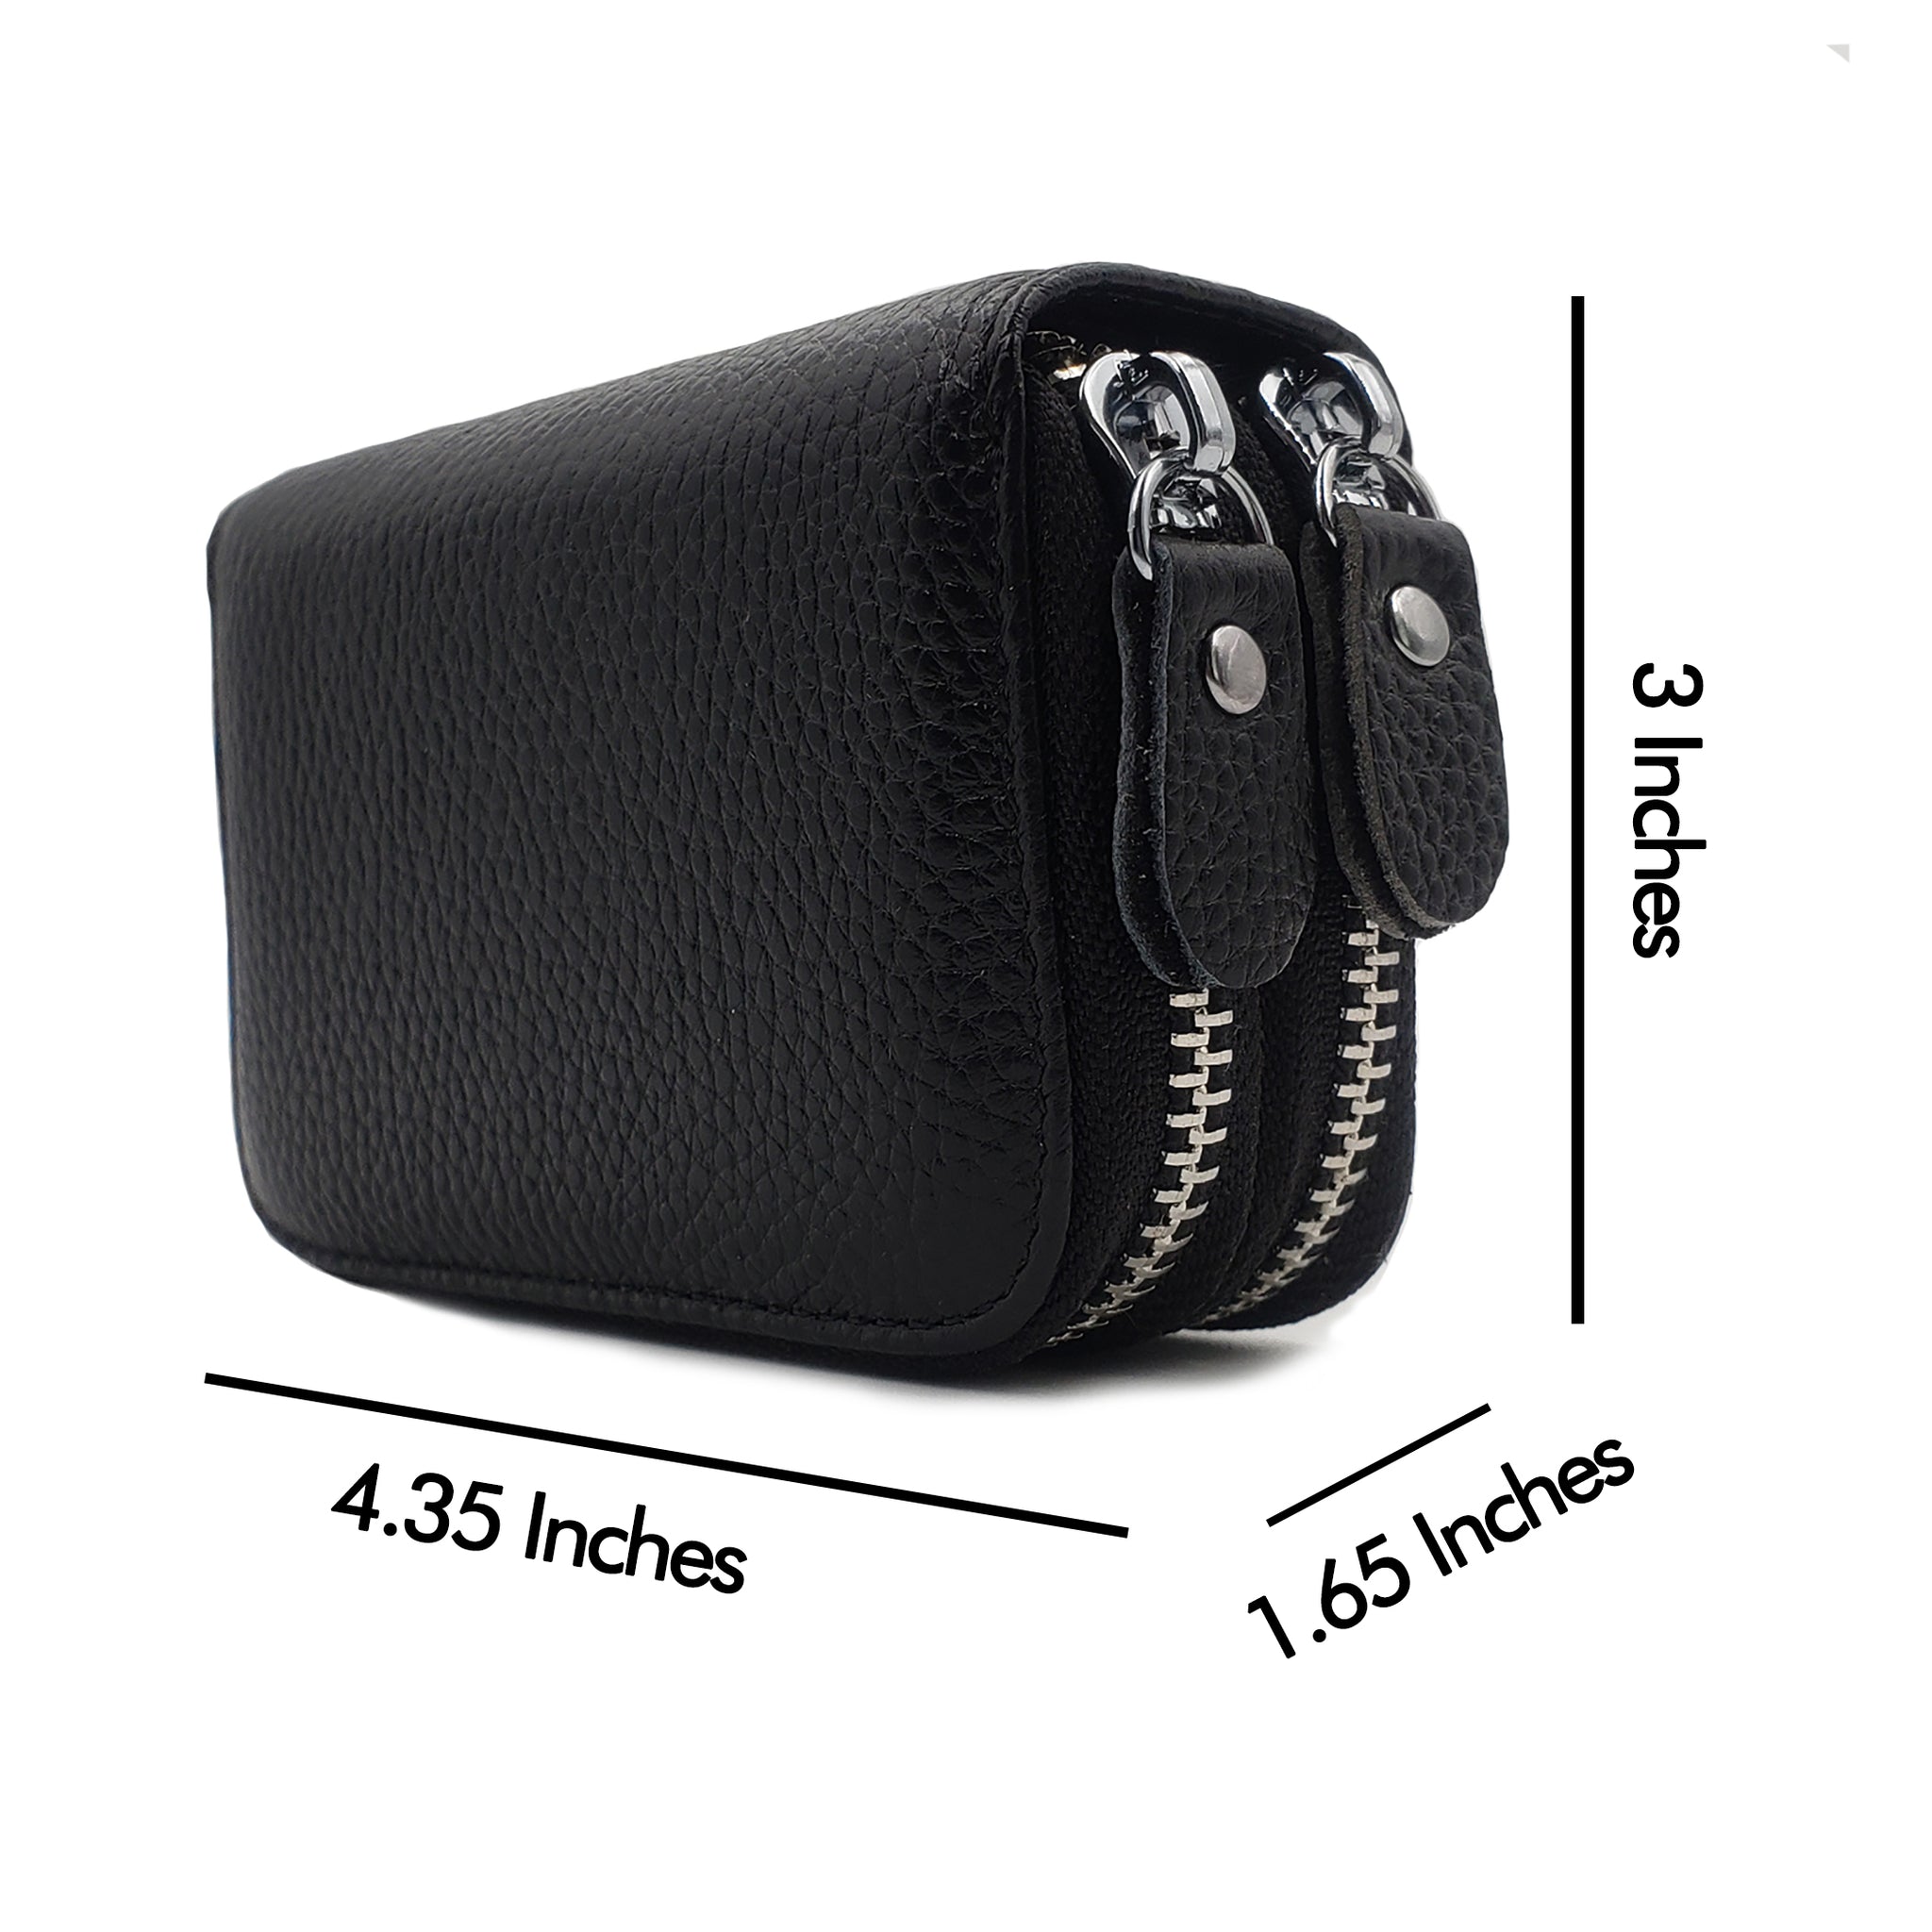 Single Zipper WALLET The Most Stylish Way To Carry Around Money Cards And  Coins Men Leather Purse Card Holder Long Business Women Wallet From  Hot_bag1688, $6.66